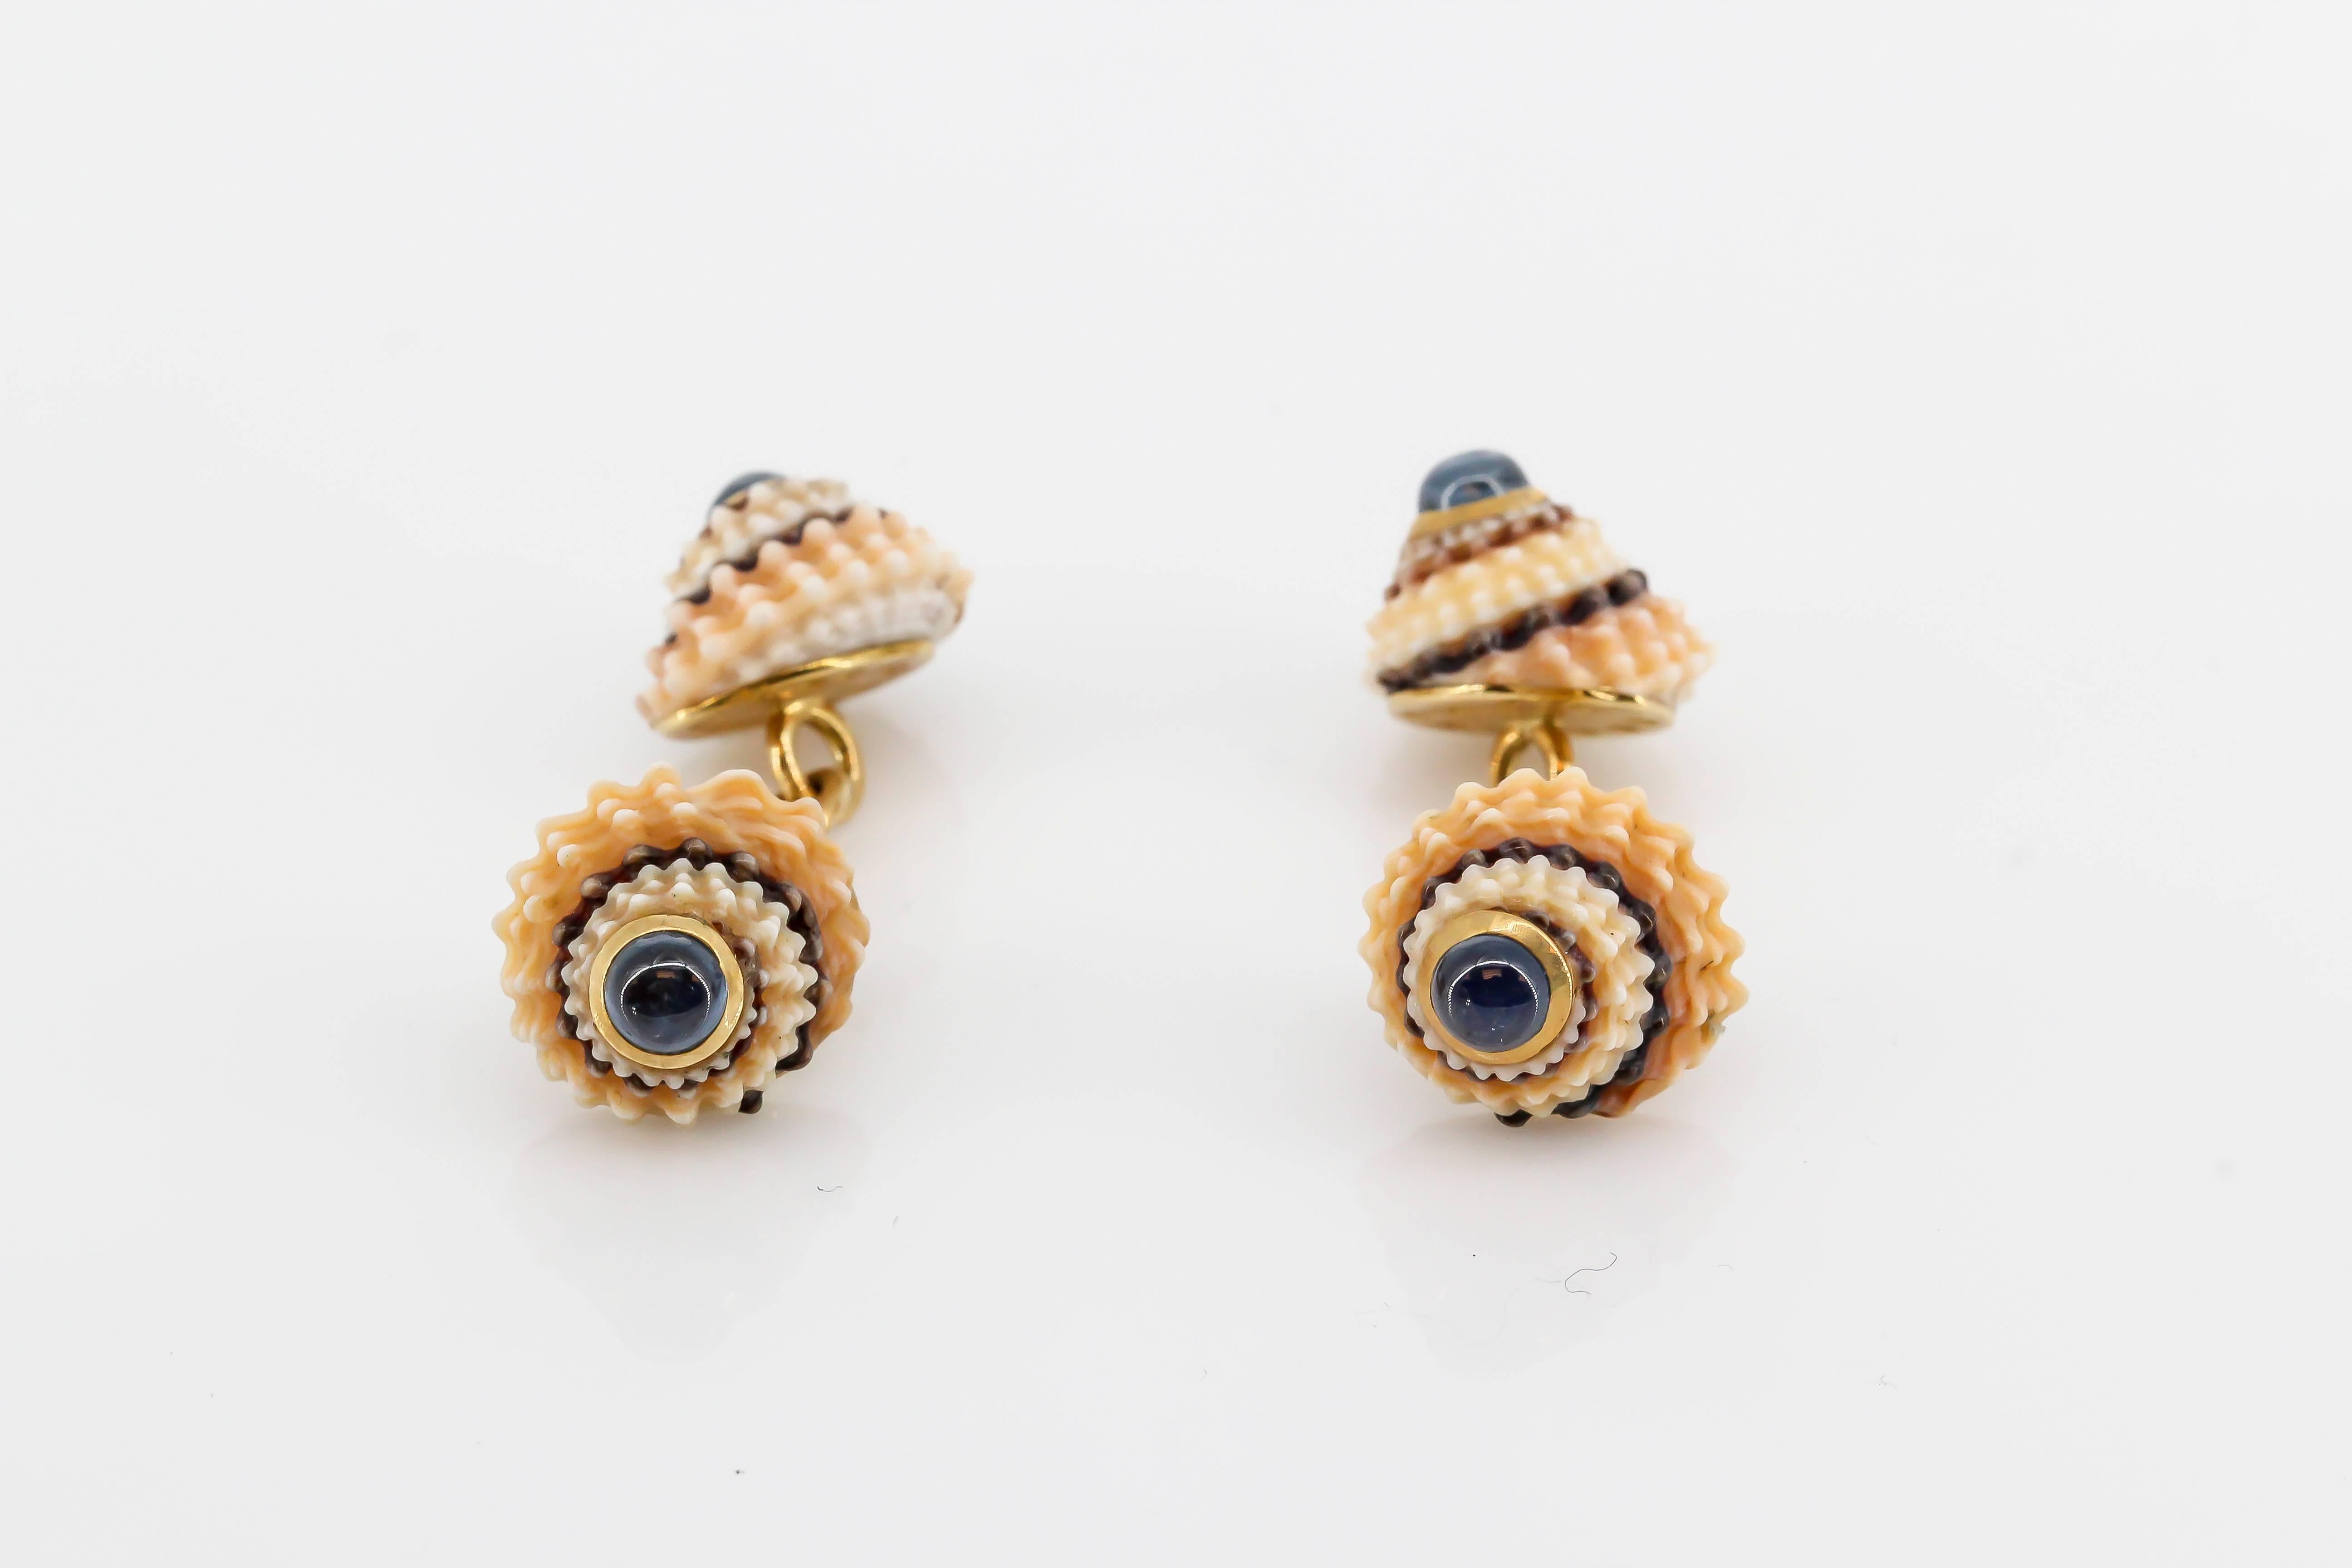 Whimsical blue sapphire, 18K yellow gold and sea shell cufflinks by Trianon. They feature cabochon sapphires on each end with a stylish sea shell design. Beautifully made and easy to wear. Original retail price $4350.

Hallmarks: Trianon, reference